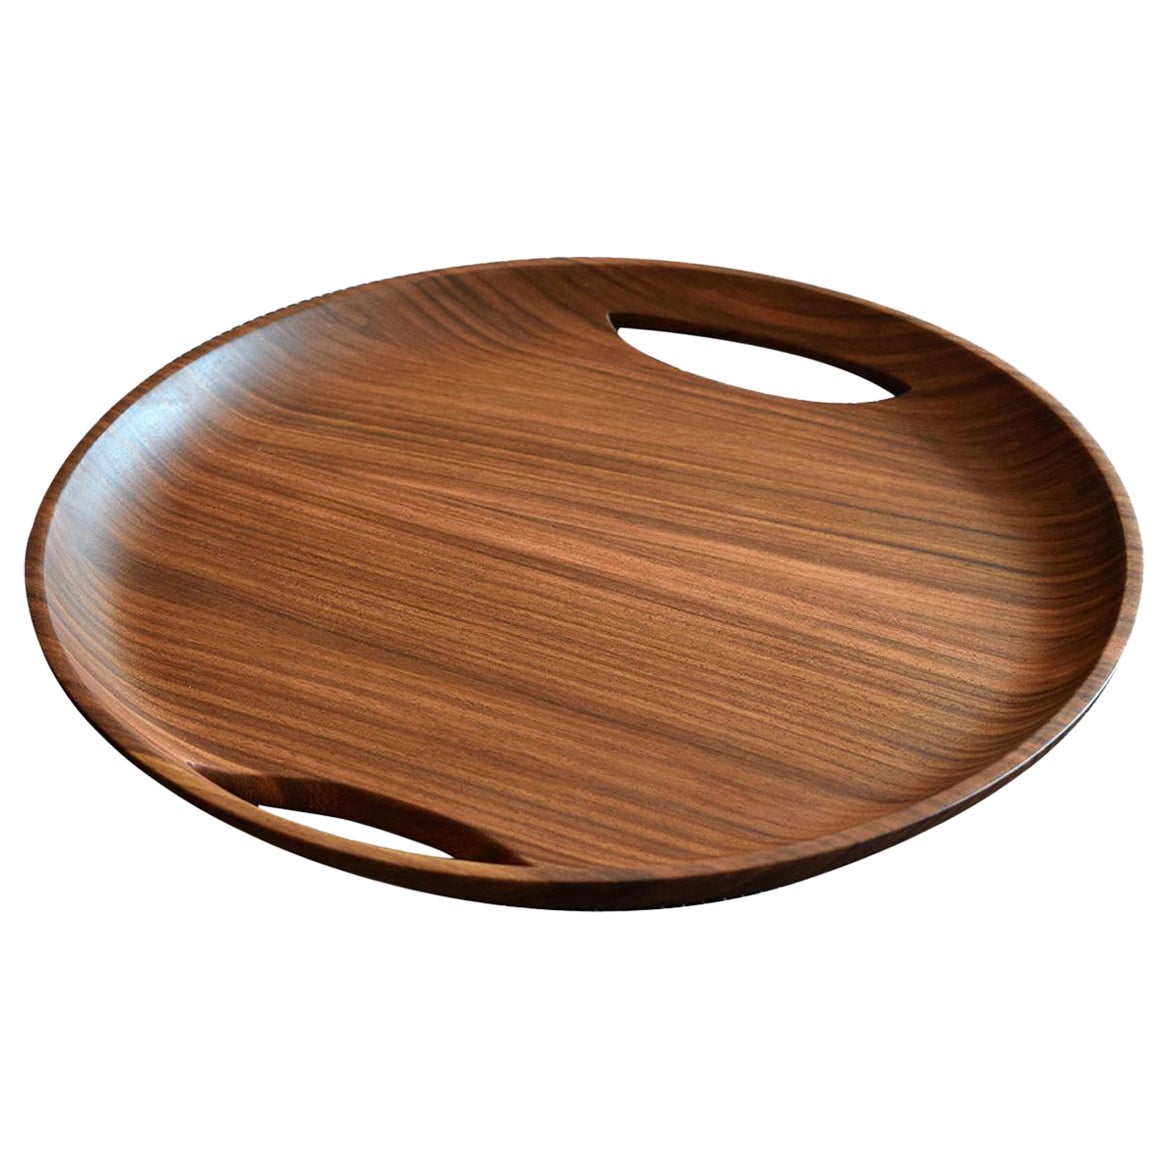 Minimalist Modern Serving Tray in Mexican Hardwood